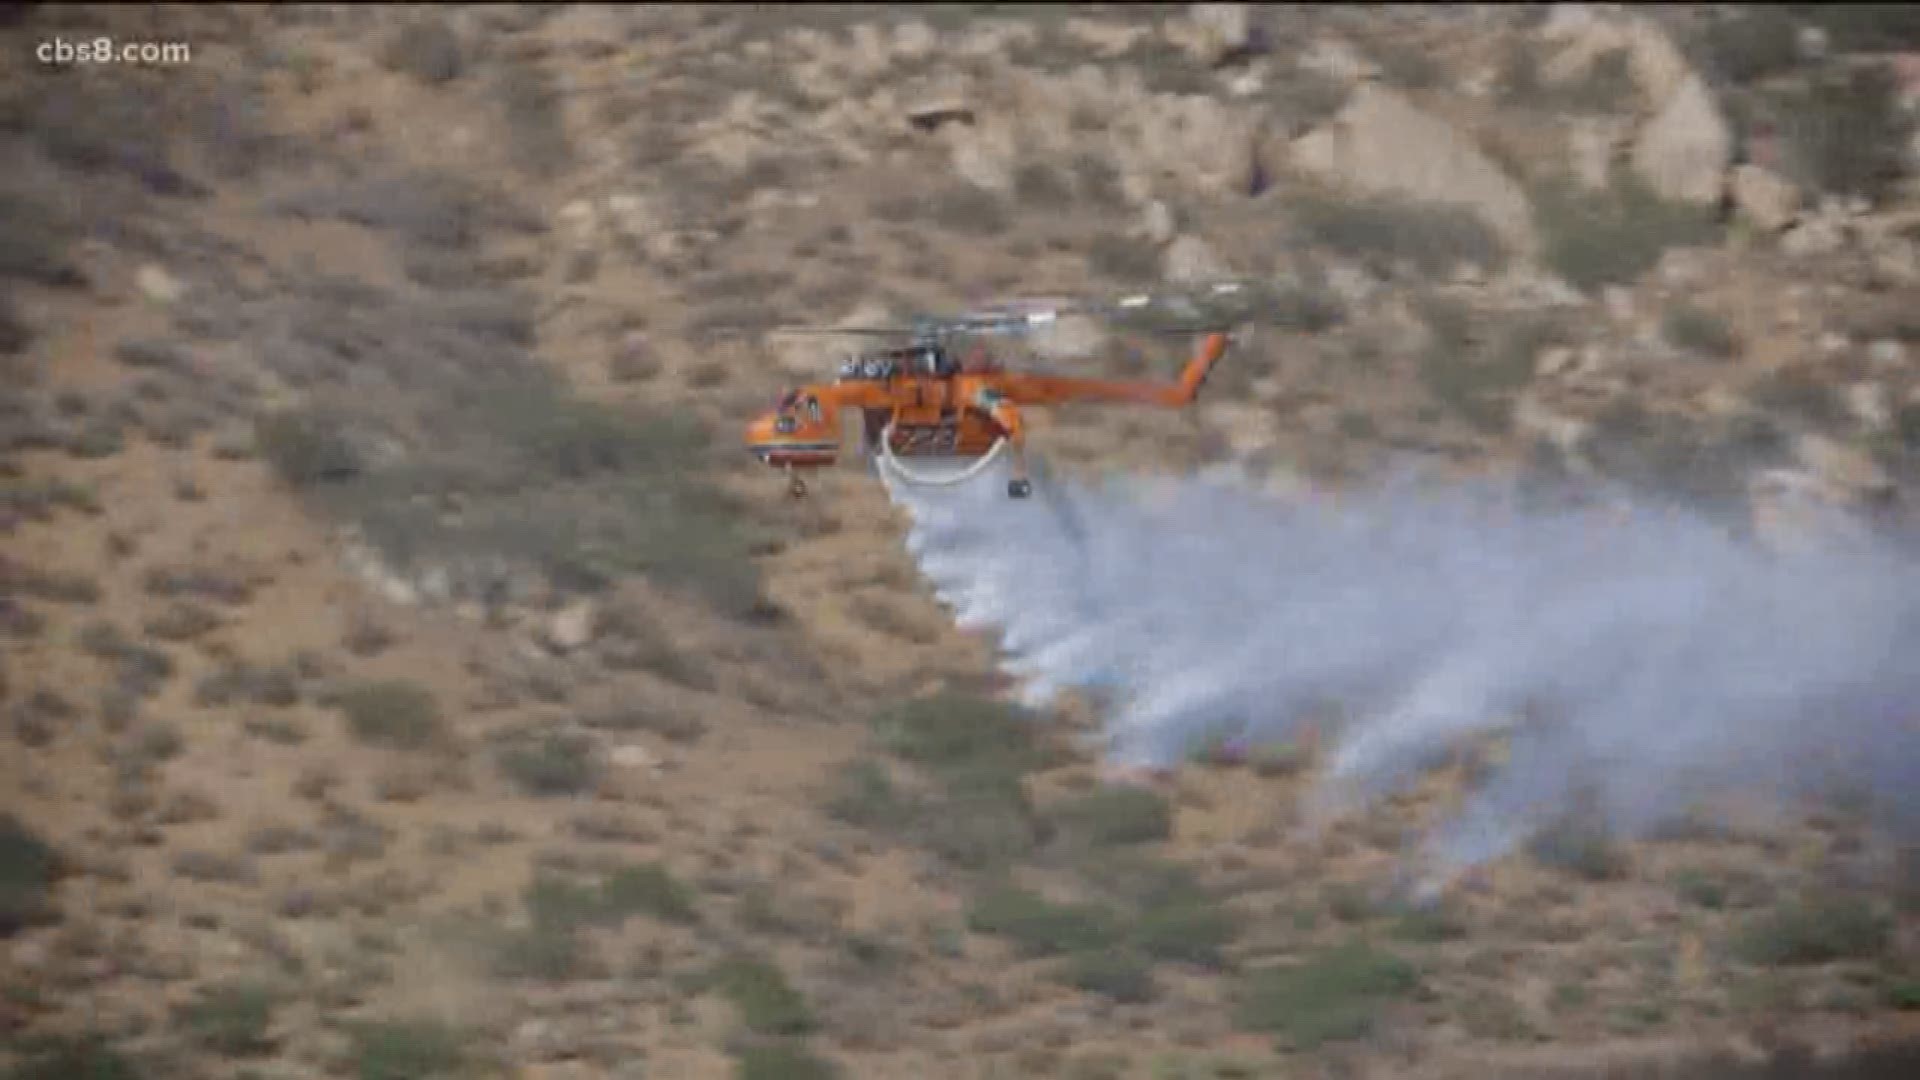 Cal Fire will dispatch a UH-60 Black Hawk helicopter to fight fires when needed, according to SDG&E.